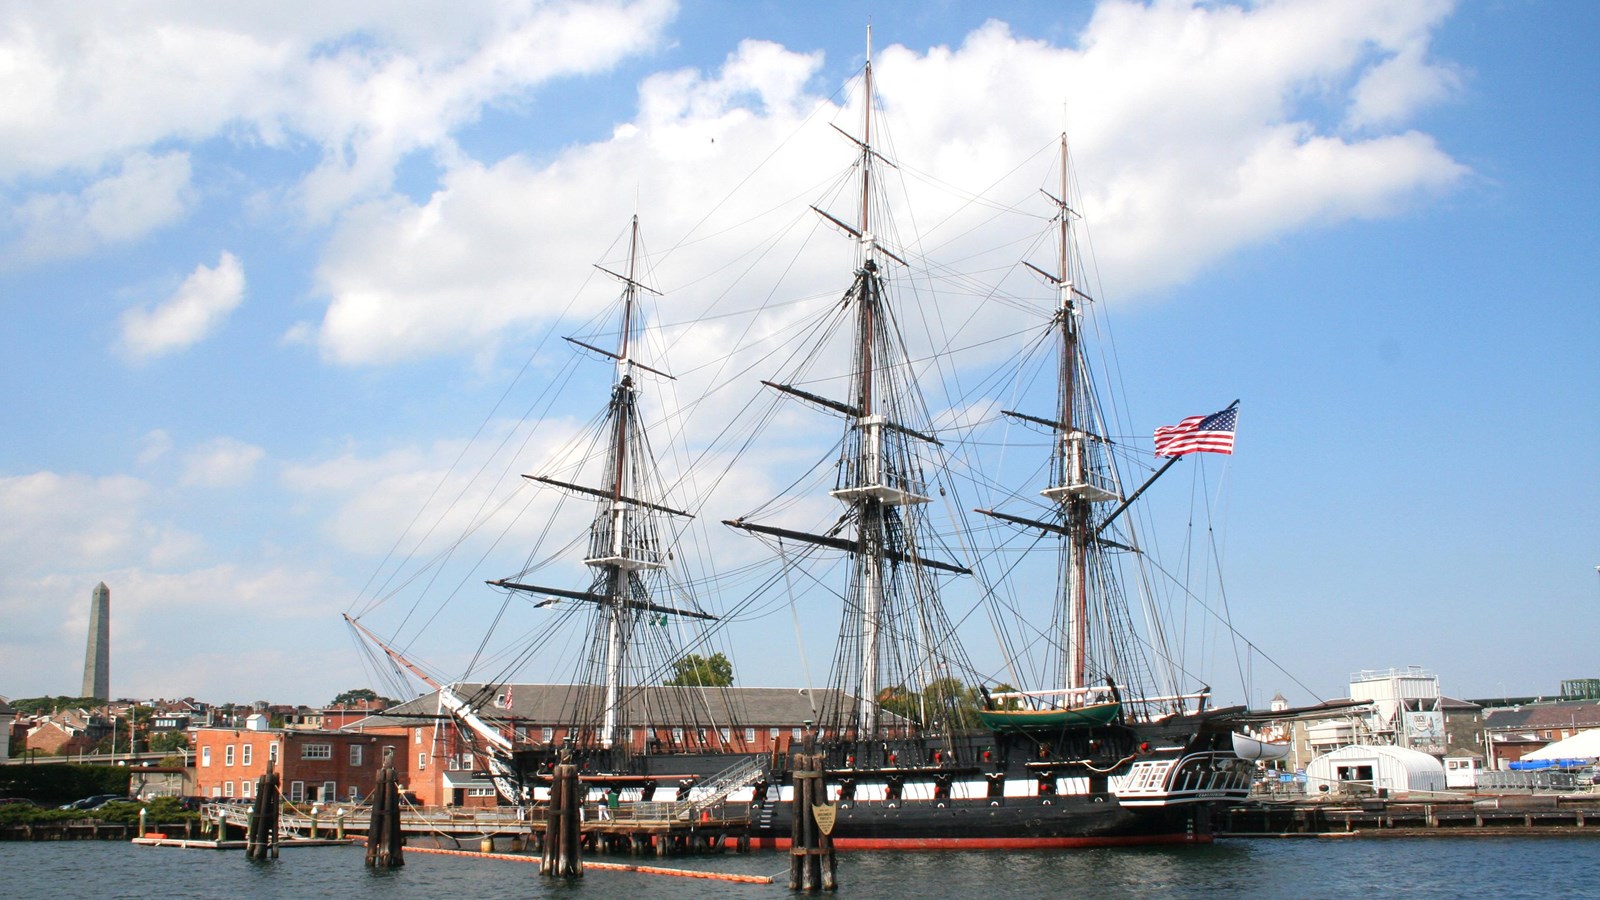 Photograph of a three masted ship in water with blue sky and some clouds.